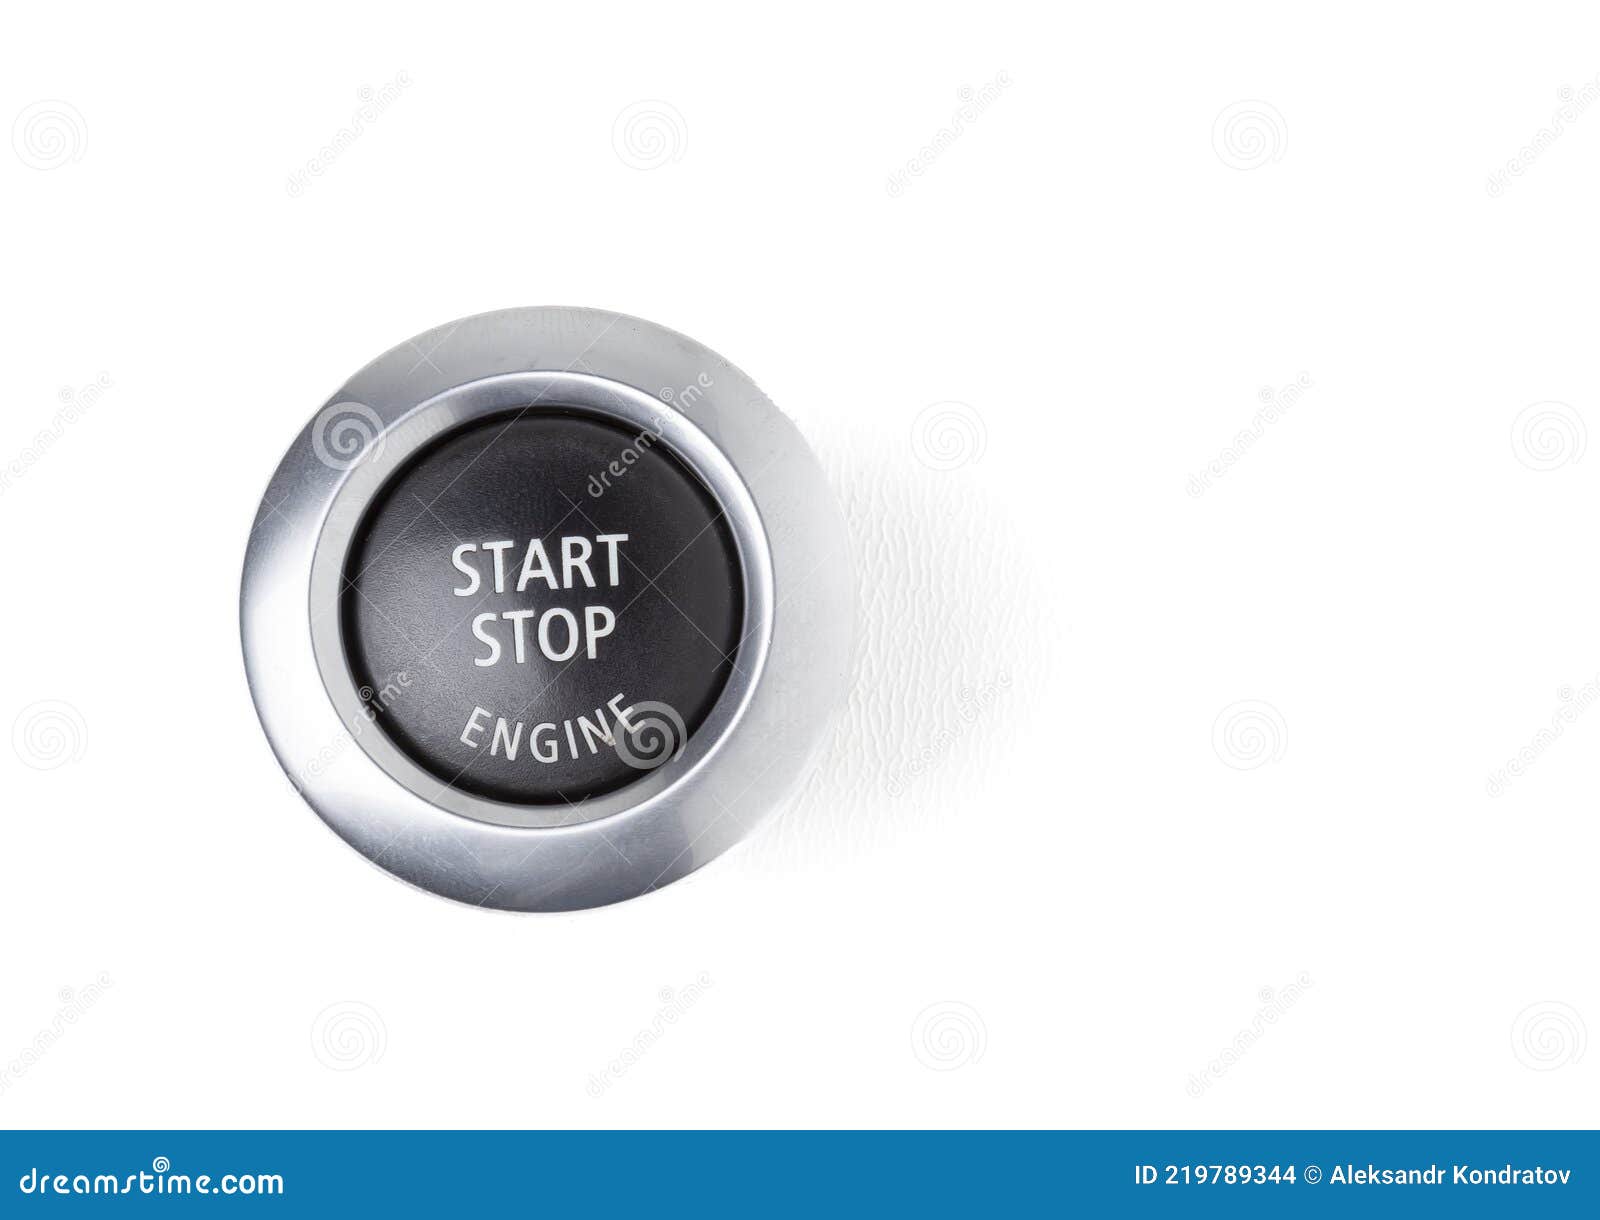 Button Start and Turn Off the Ignition of the Car Engine Close-up